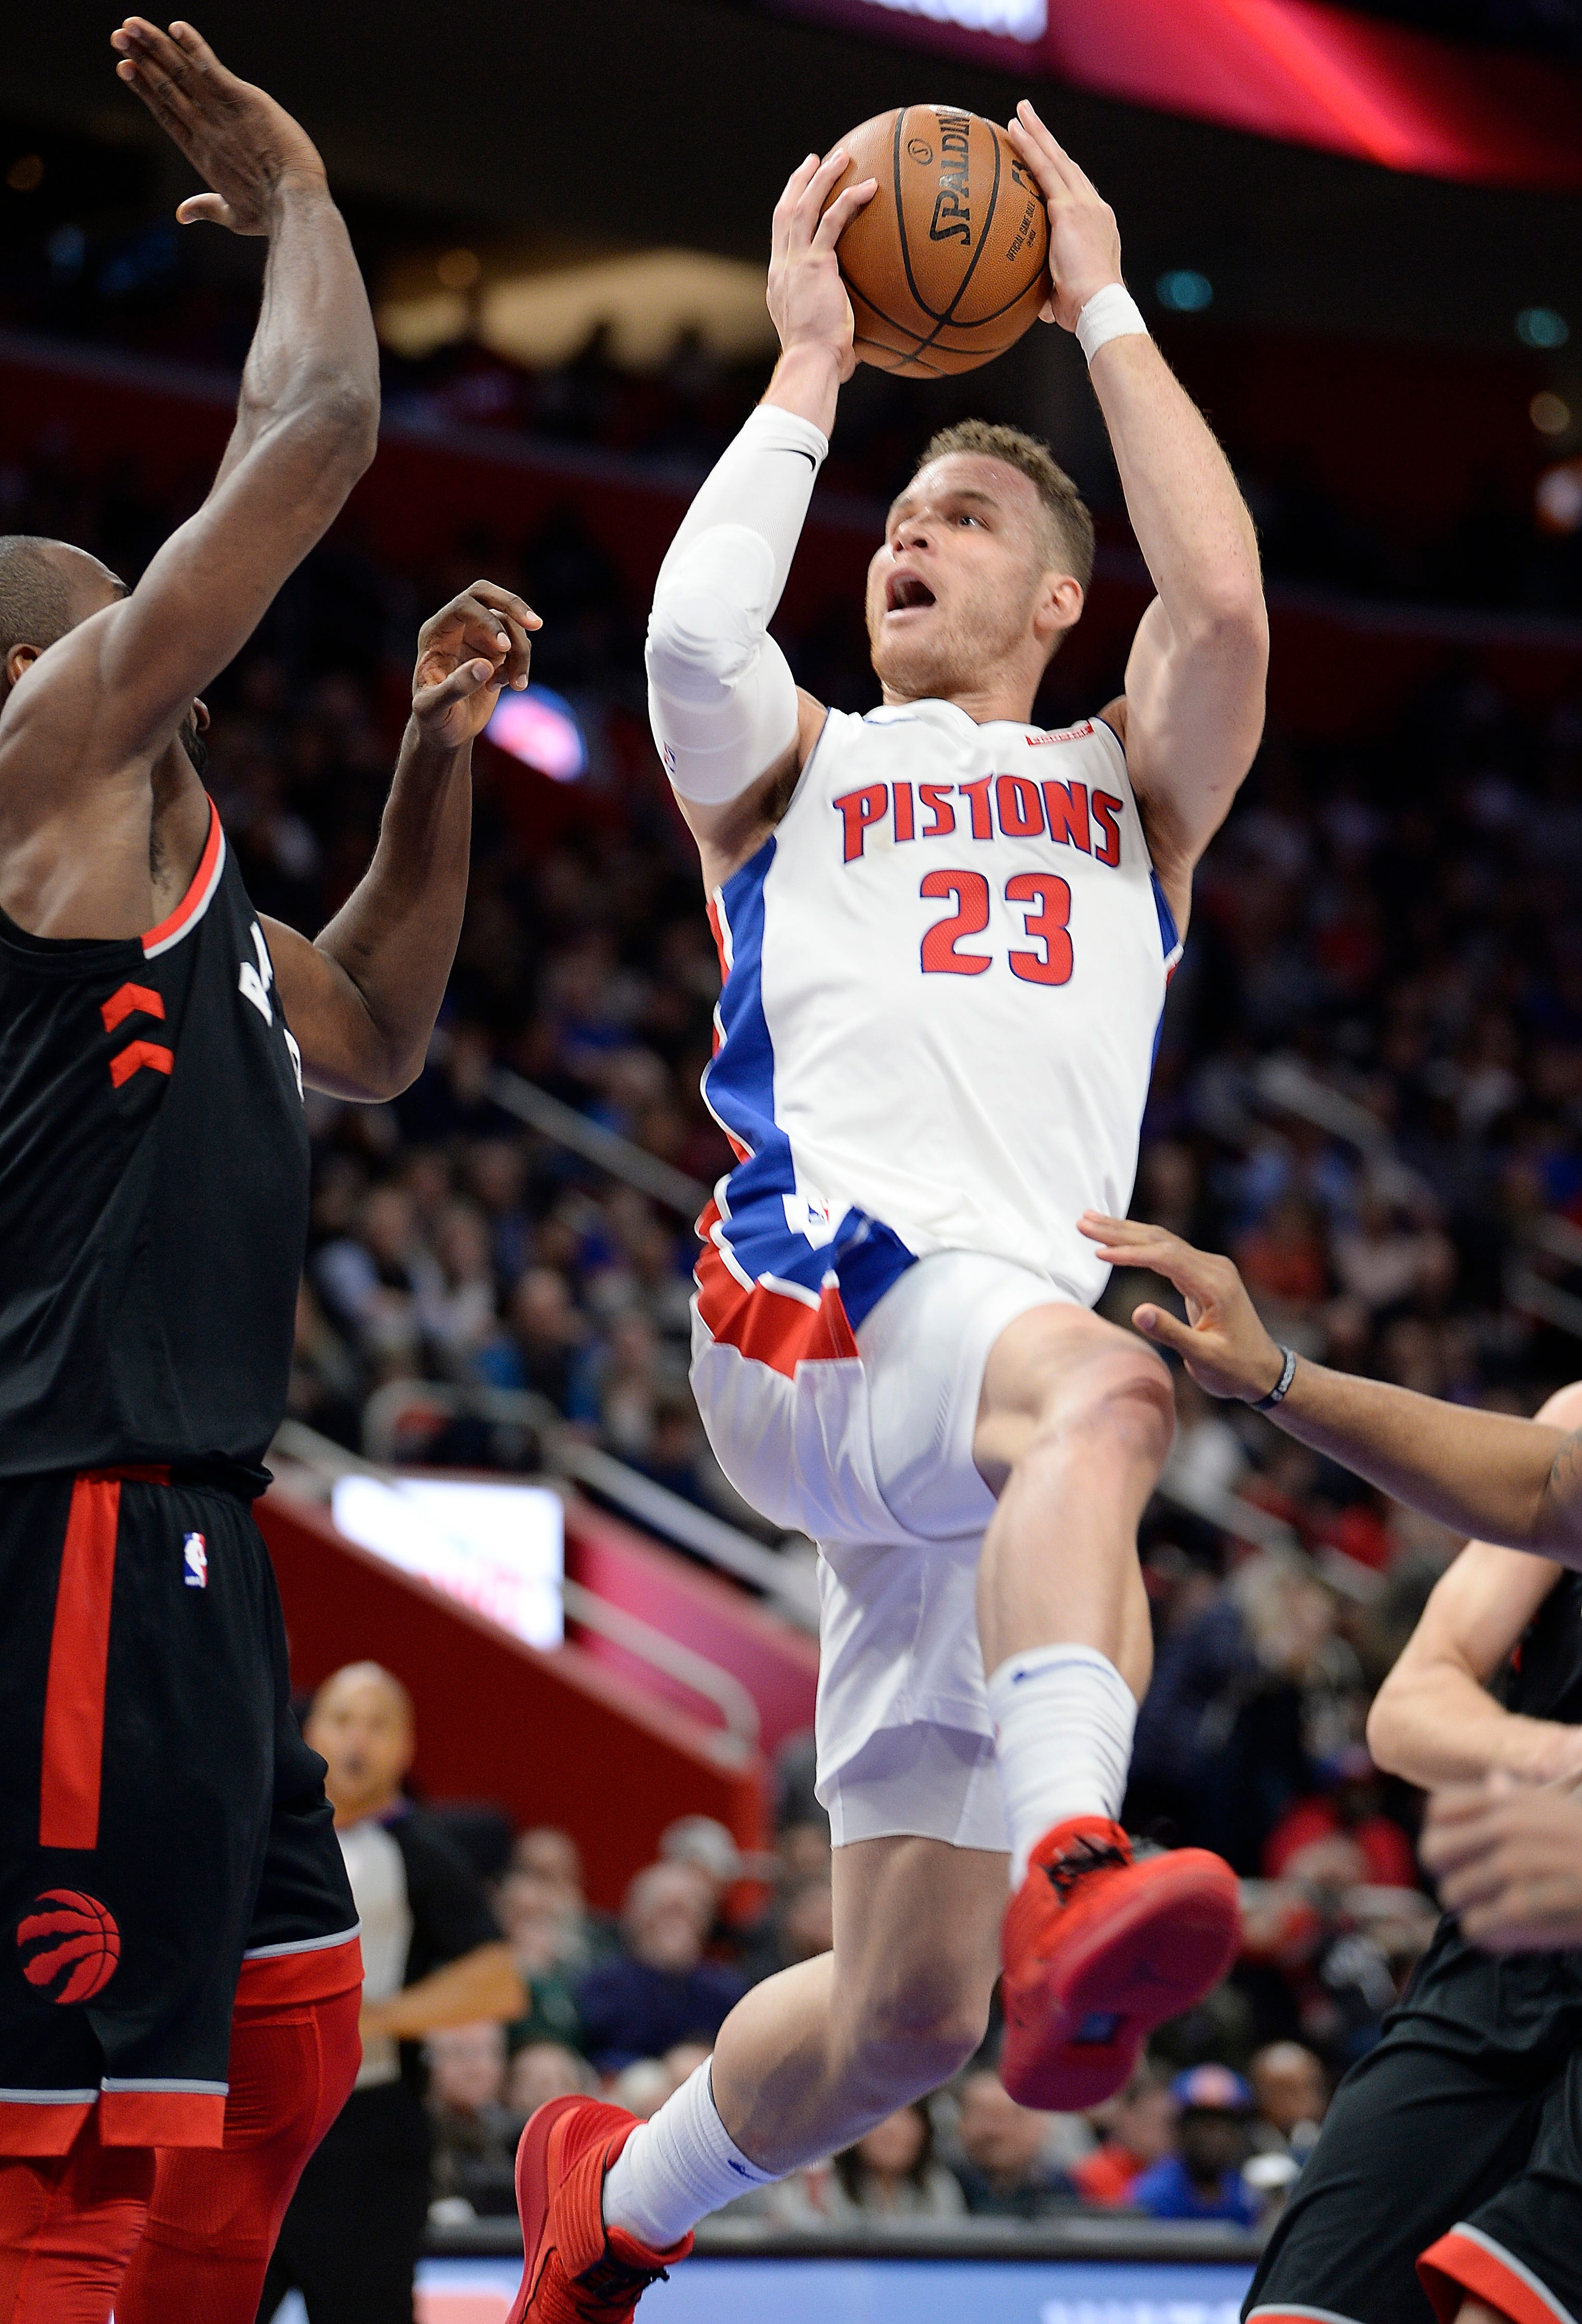 3. Blake Griffin, F: He has been injured for stretches in his career, but his value to the Pistons still is very high — and it should be for a max contract. Griffin's versatile skill set makes teams game plan for him and bring double-teams, which is the intangible the Pistons were missing. They went 5-3 without him last season, but his presence could boost their standing in the East if he stays healthy.